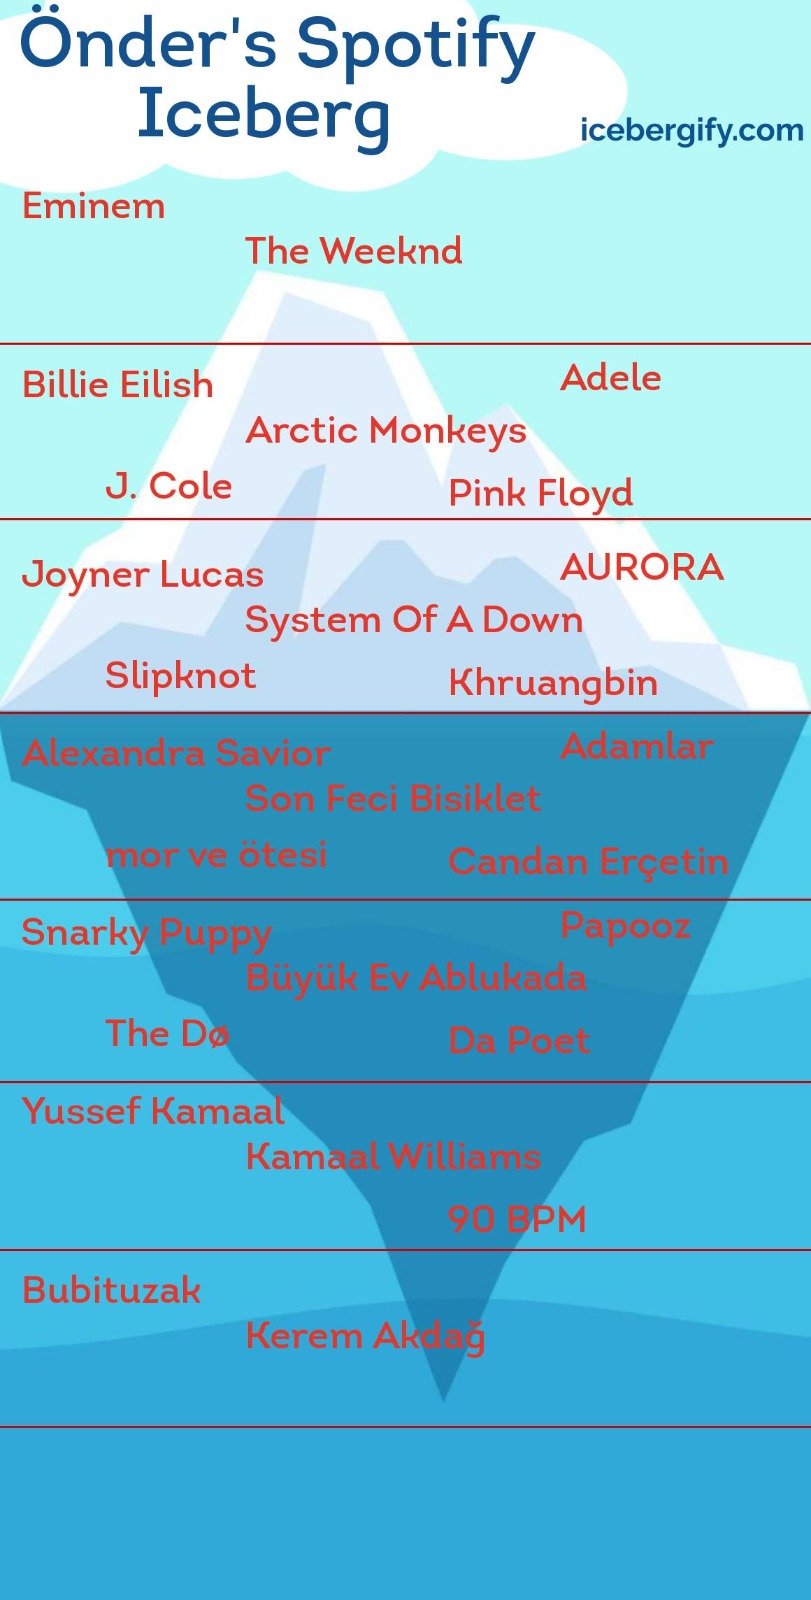 In this article, we are going to go over how to use Spotify iceberg chart generator, so you can find out what your Spotify iceberg looks like.